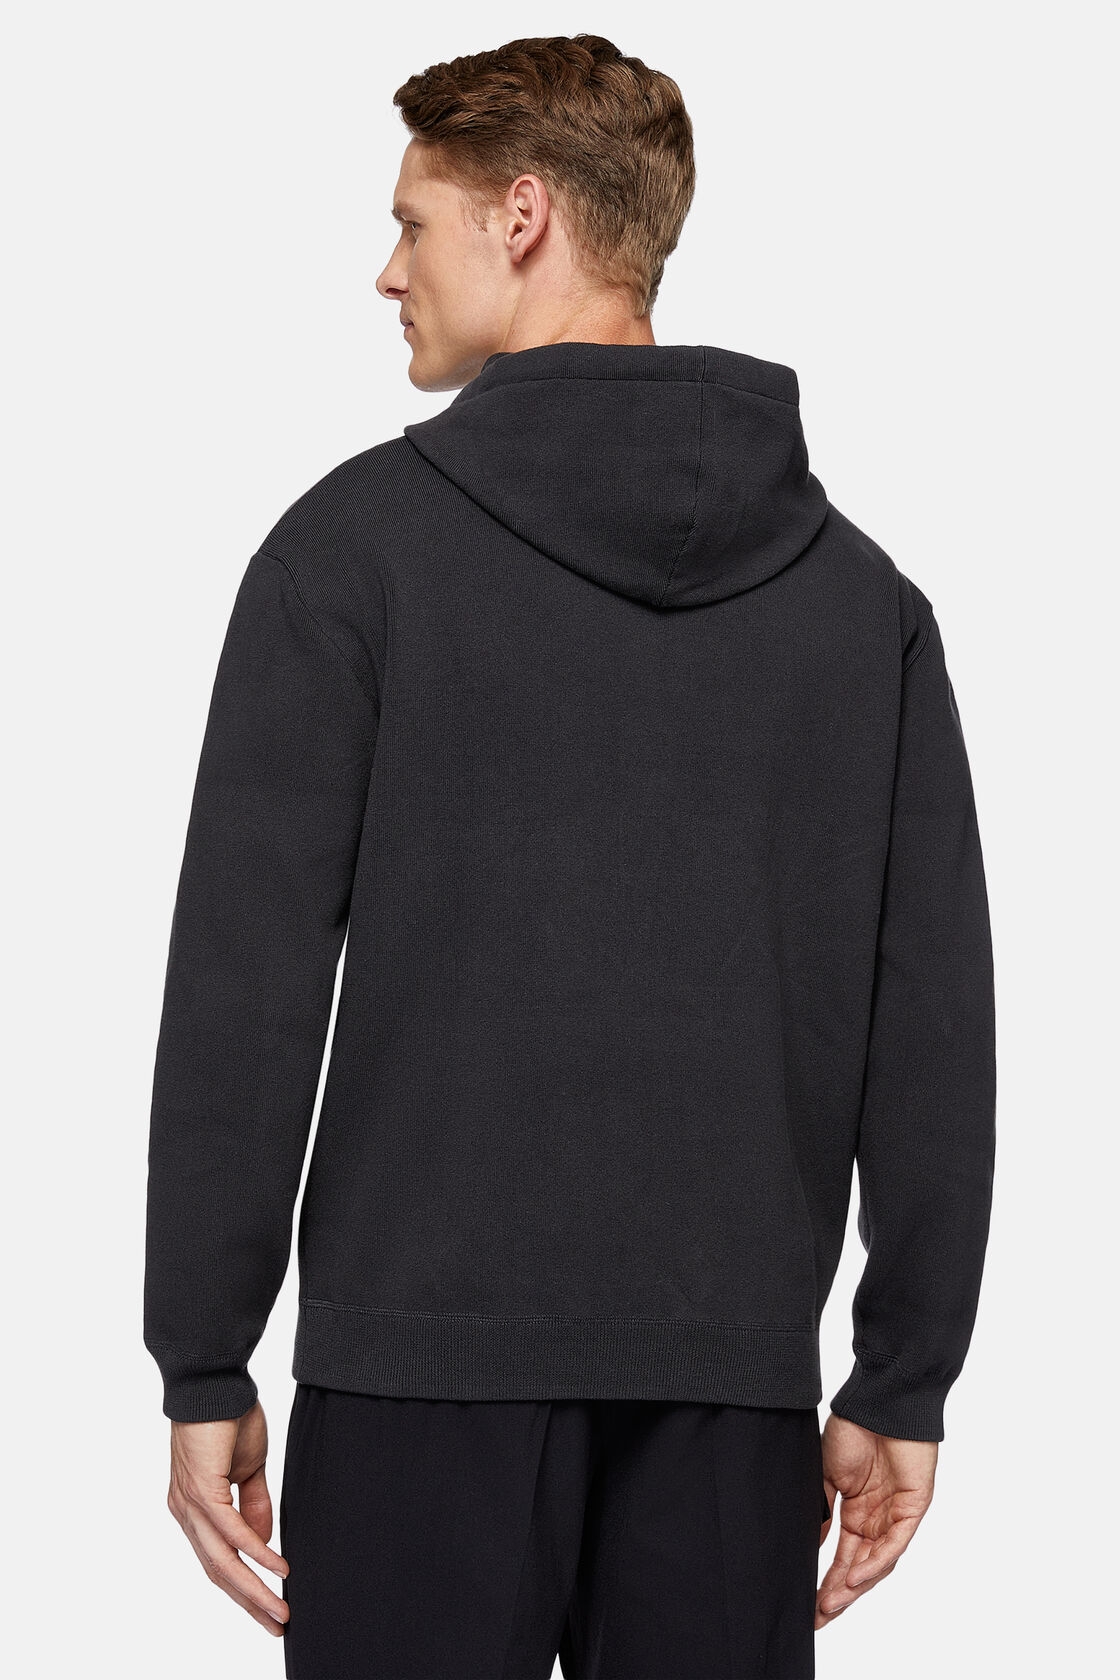 Charcoal Hoodie in Technical Cotton Jersey Fleece, Charcoal, hi-res